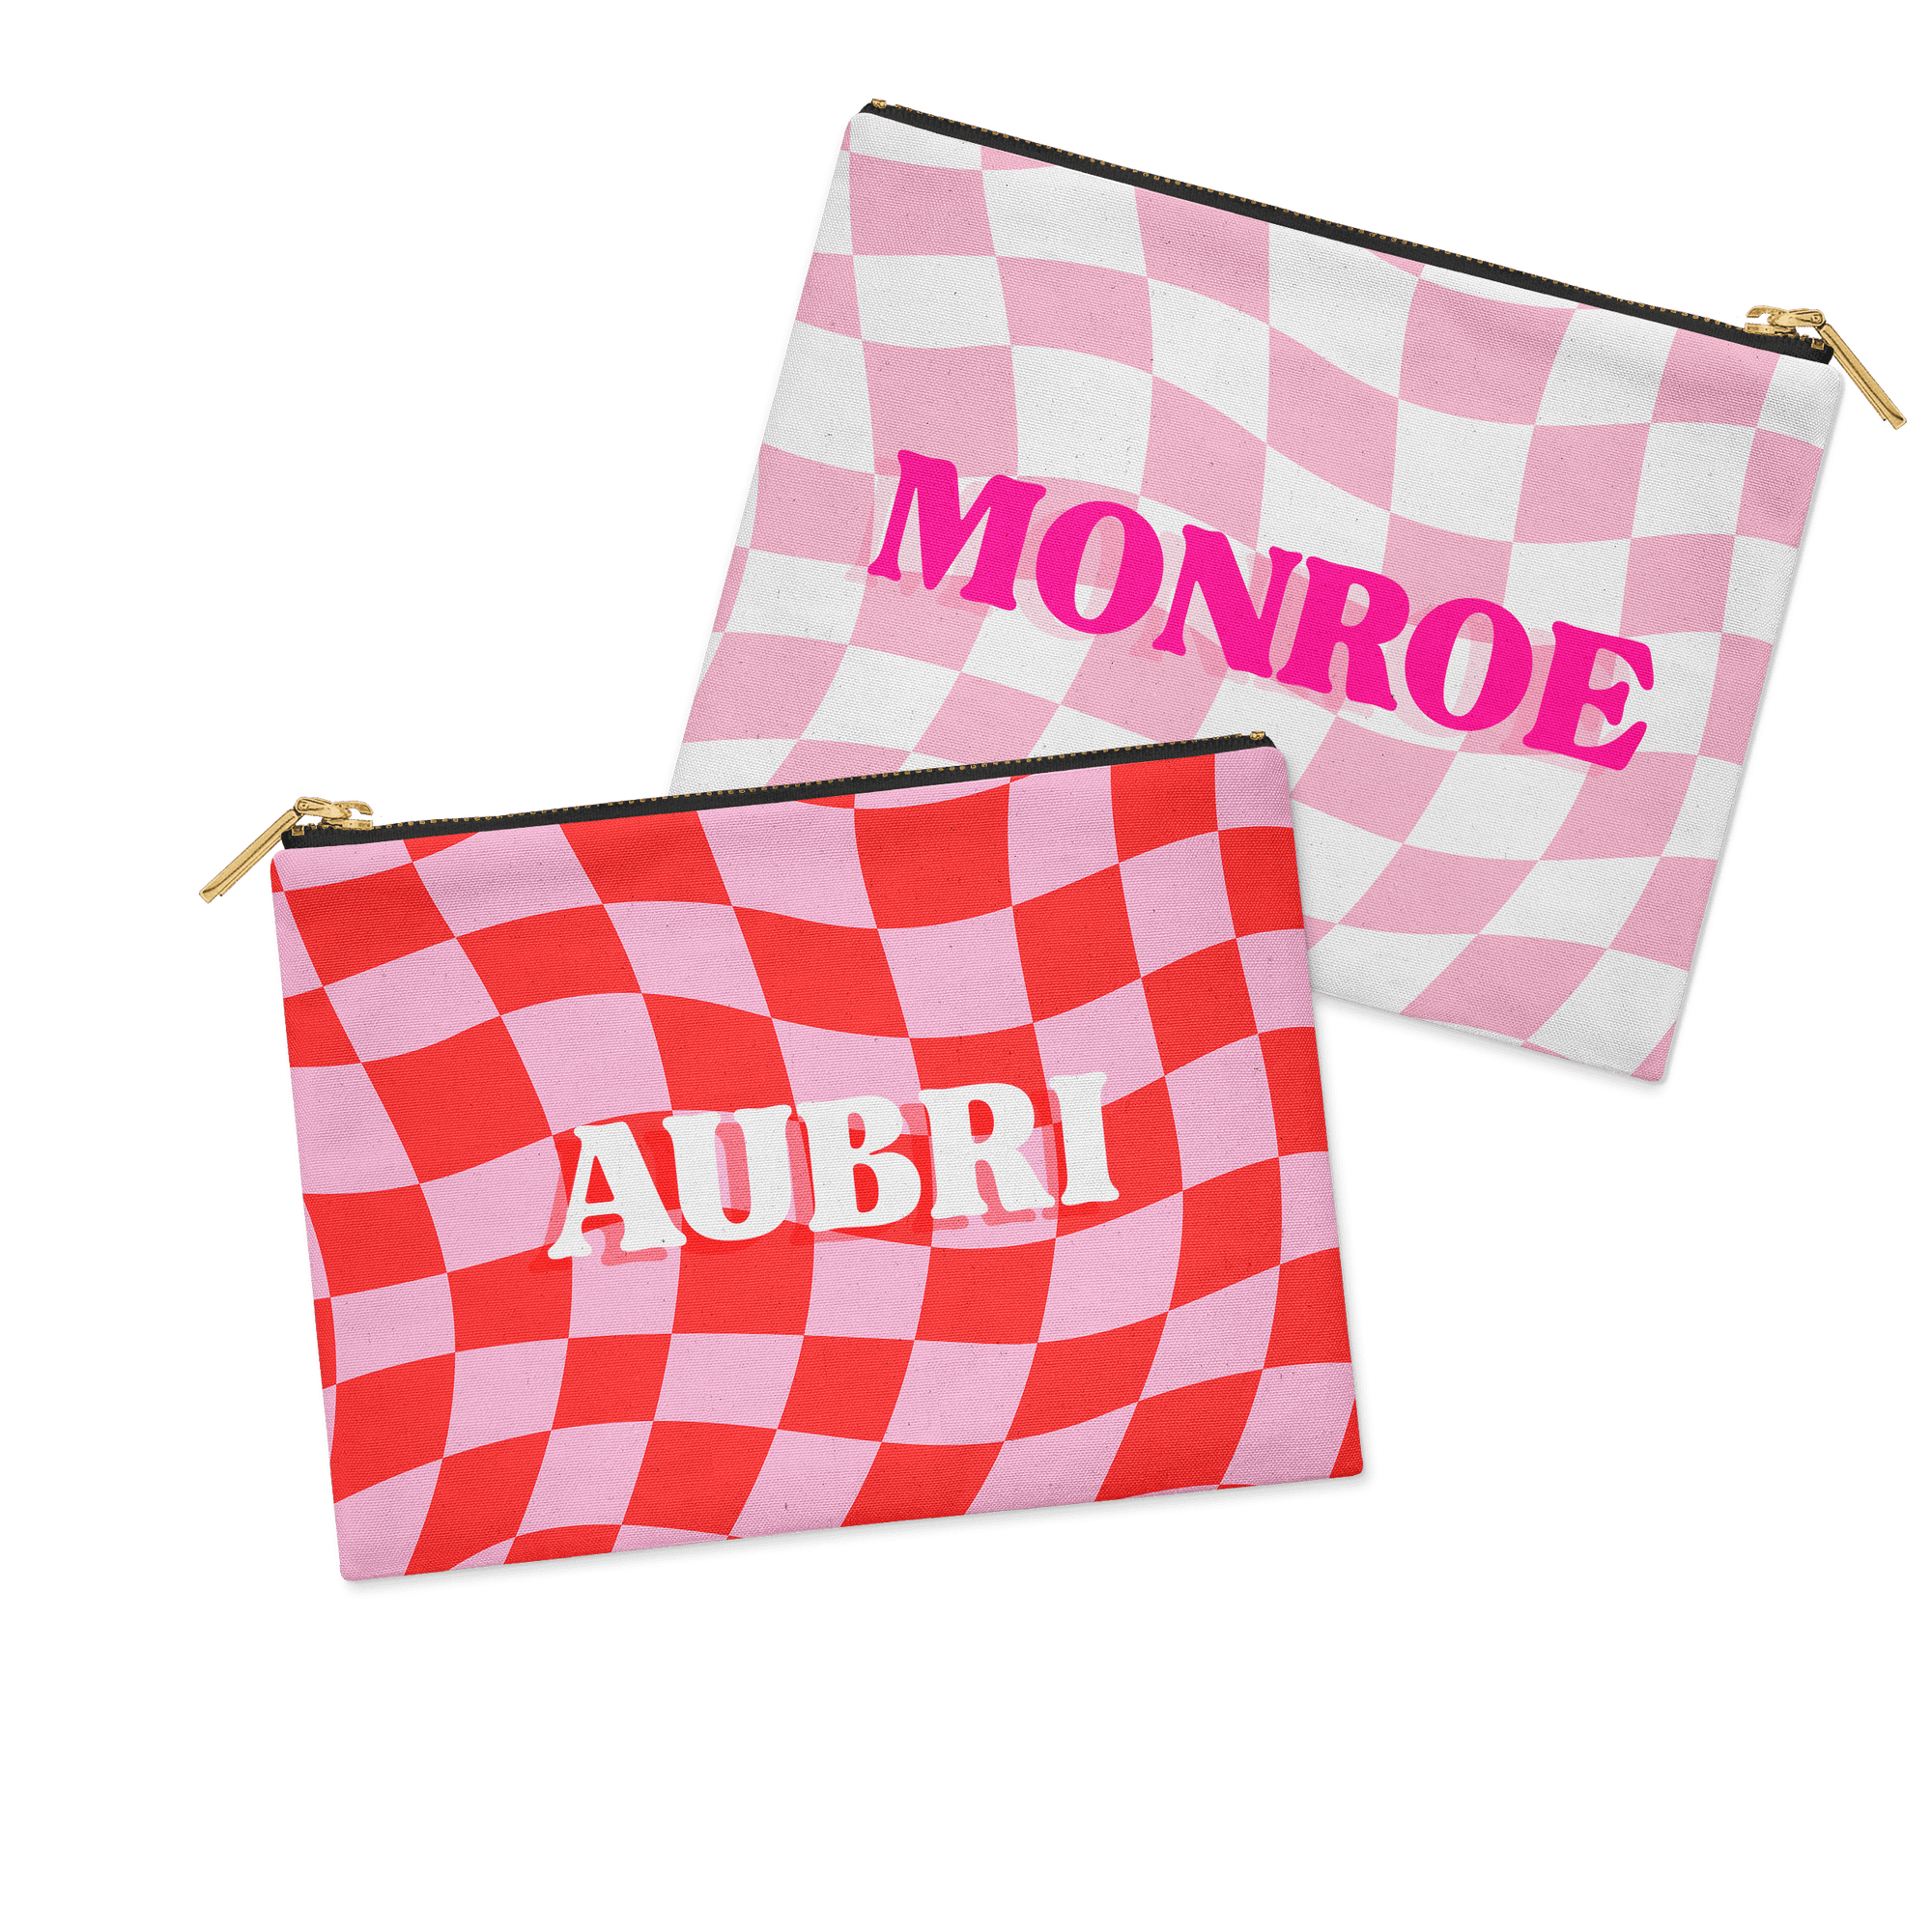 WAVY CHECKERBOARD PERSONALIZED ACCESSORY BAG FLAT